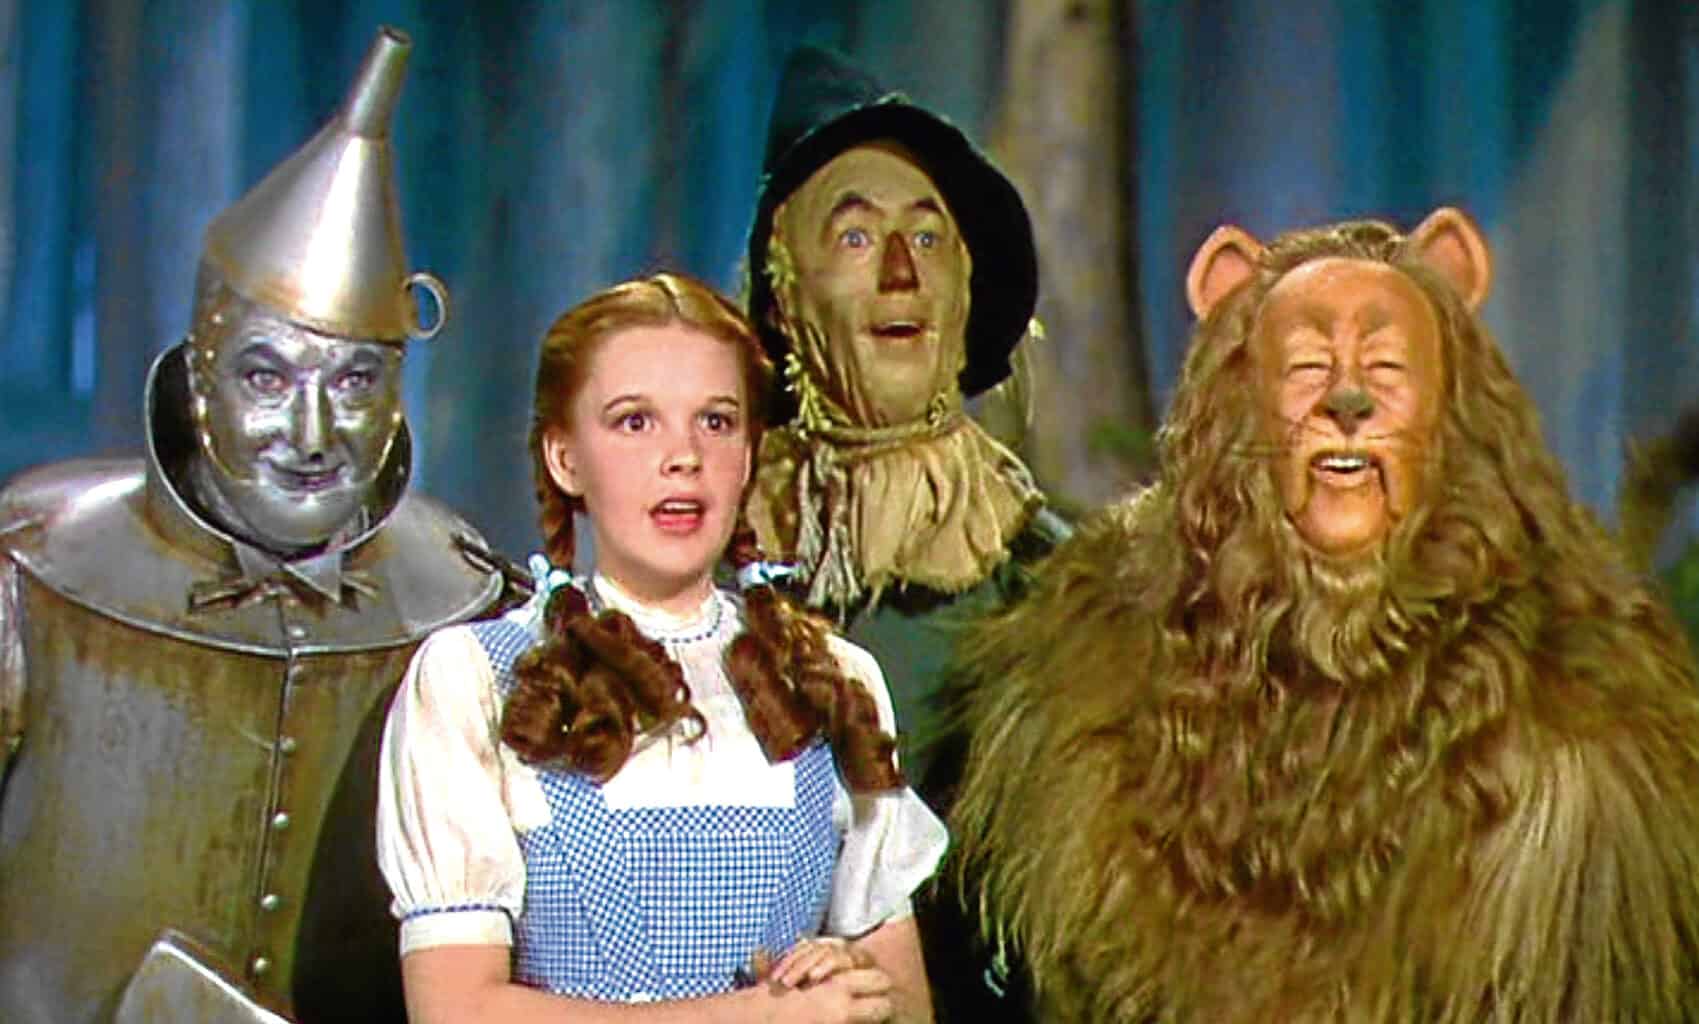 The Wizard of Oz (1939, PG)